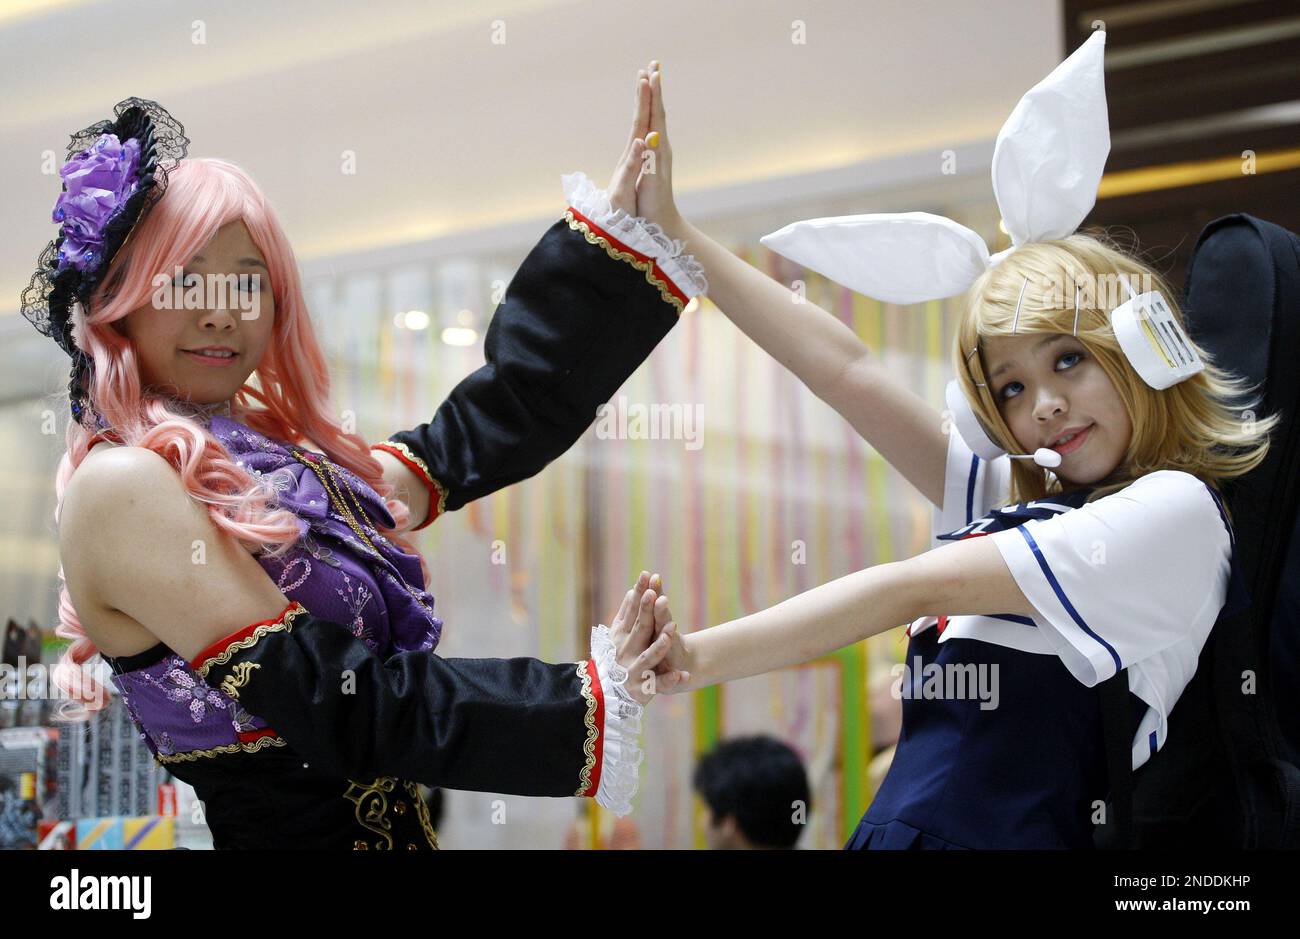 Fans of "cosplay" dressed up as their favorite anime characters pose during the Cosplay, Comics, Anime & Games Exhibition (C2AGE) at a shopping mall in Petaling Jaya, near Kuala Lumpur, Malaysia, Saturday, July 17, 2010. The exhibition aims to introduce the enticing world of Japanese animation, American comics and those with the passion for gaming to youth and the public. (AP Photo/Lai Seng Sin) Stock Photo